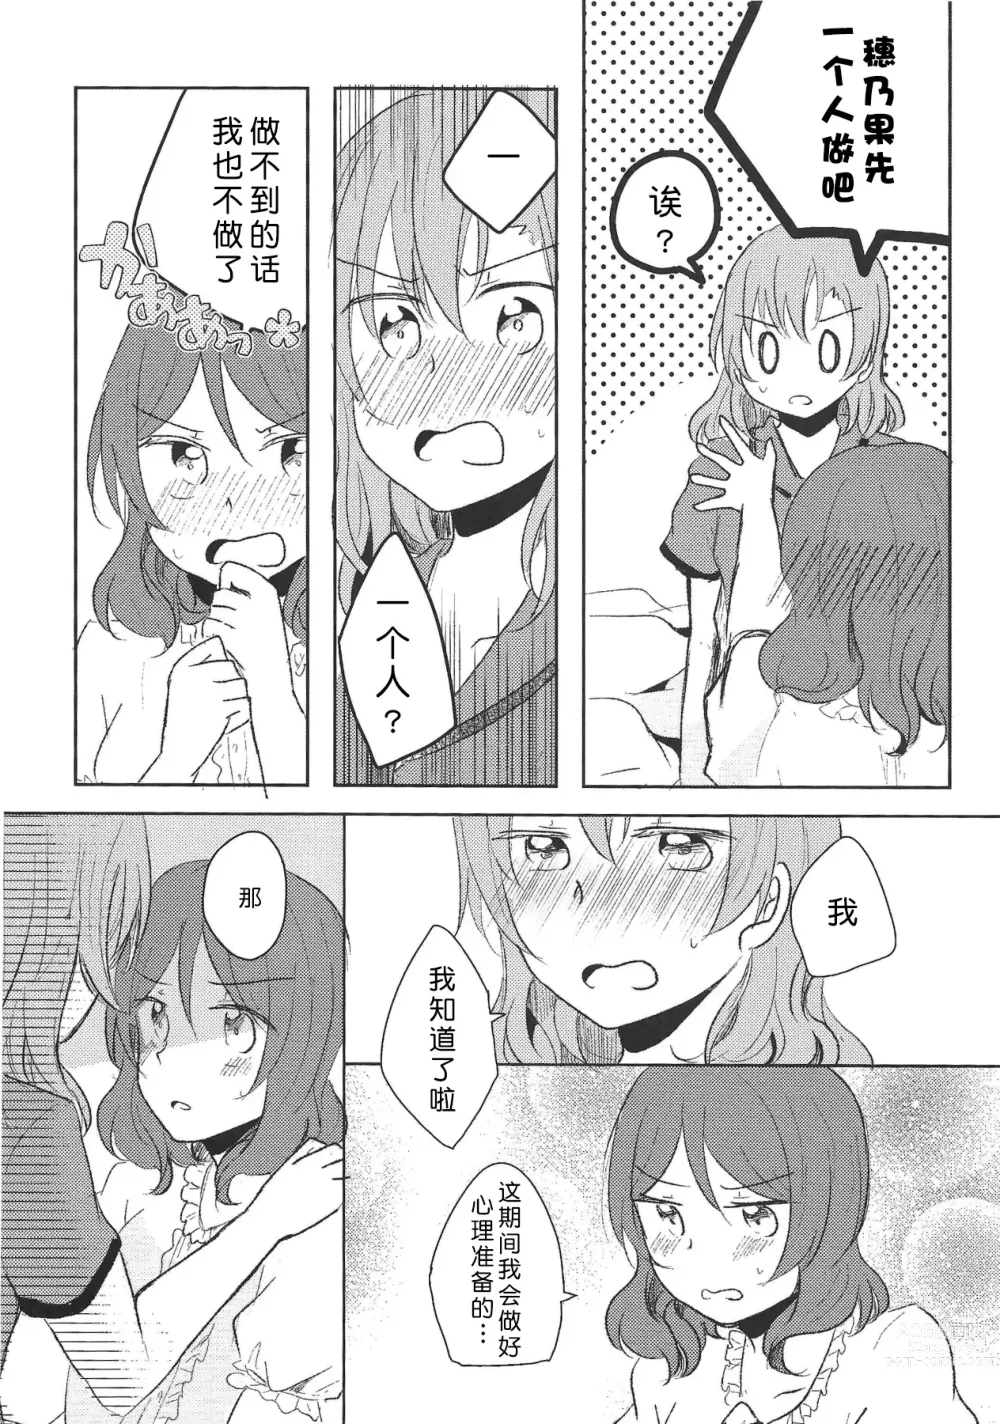 Page 10 of doujinshi LOVE STEP!